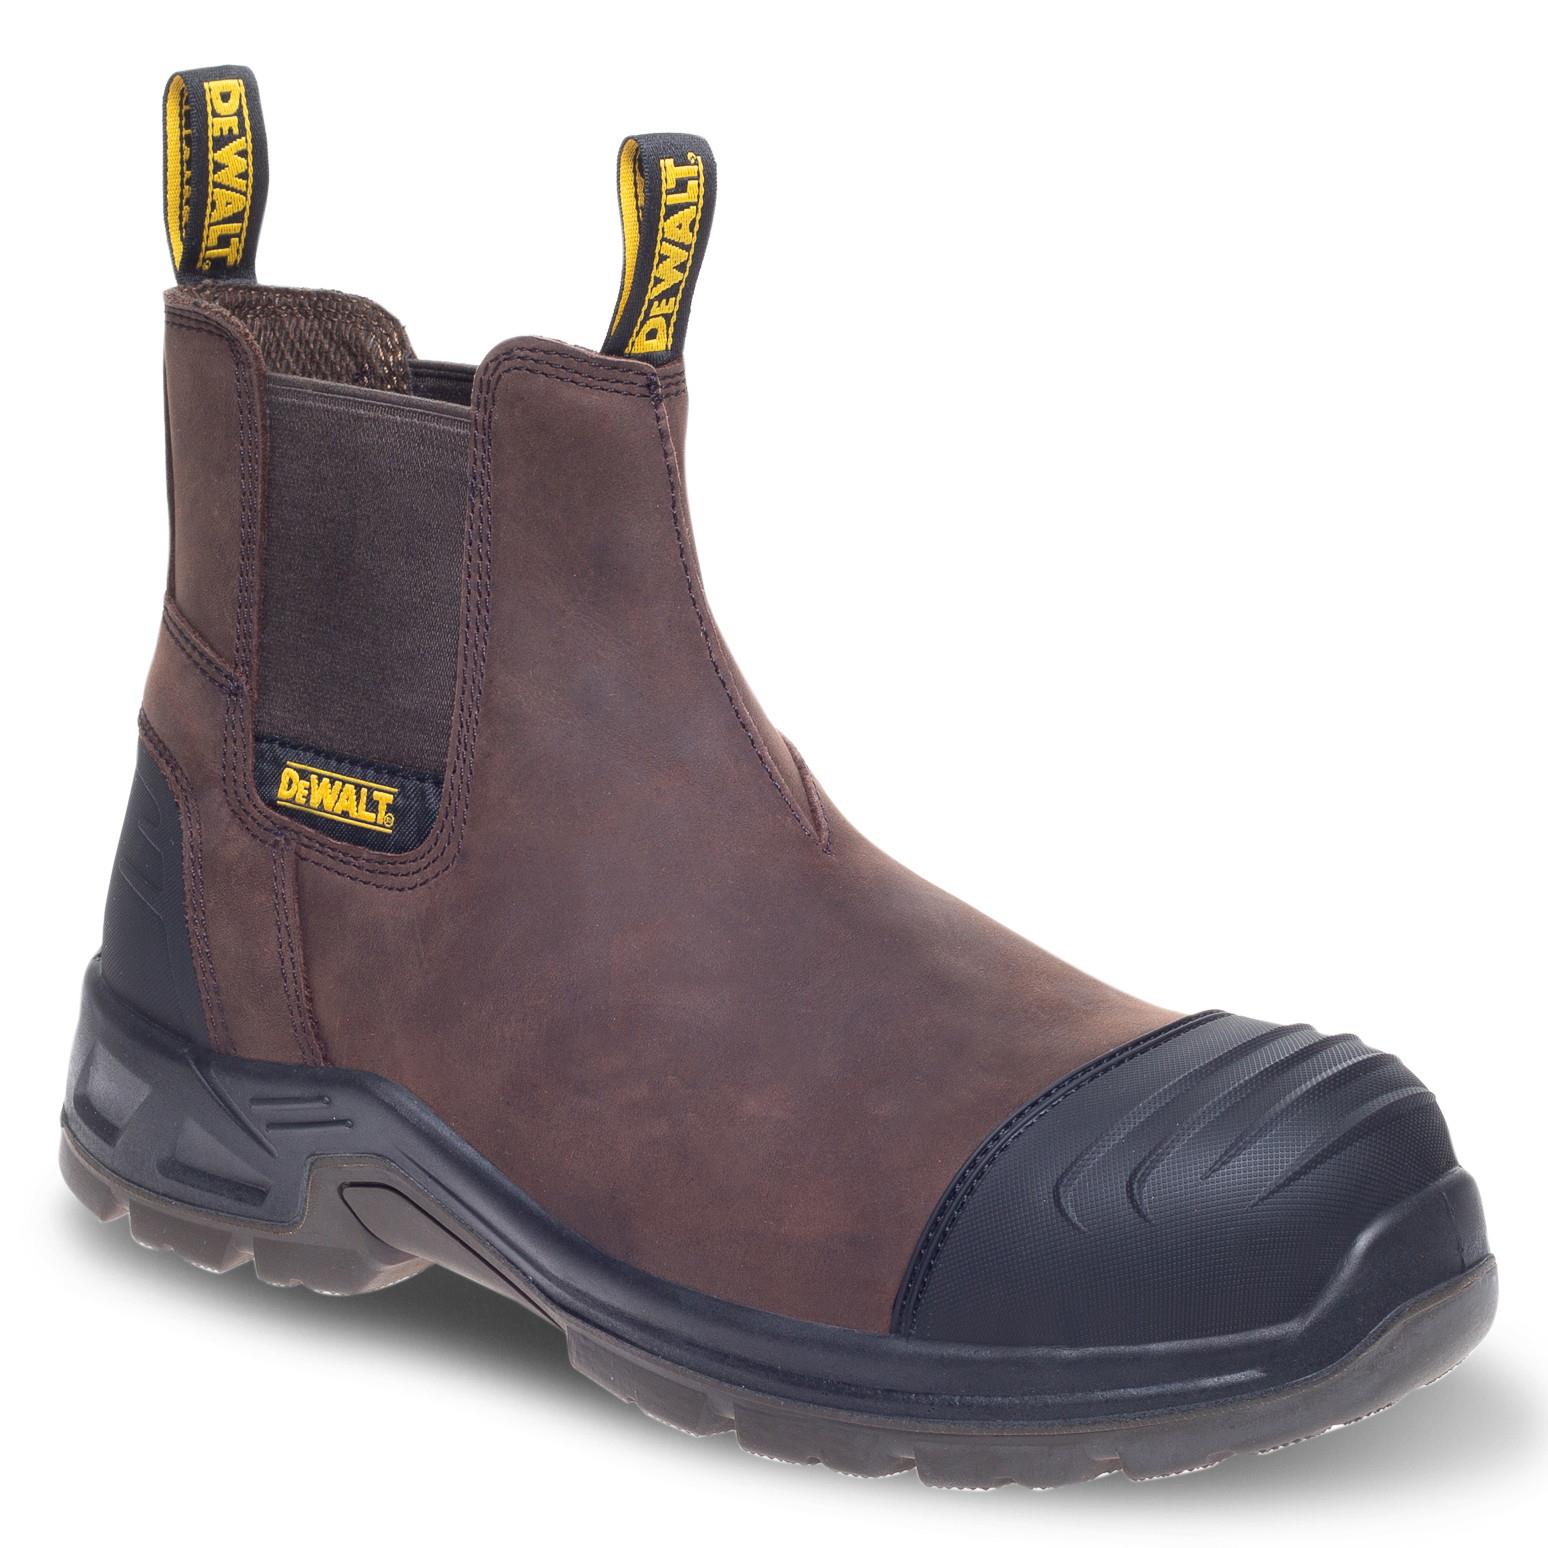 DeWalt Grafton Water Resistant Dealer Boot; S3; HRO And SRC Rated; Brown (BN); Size 9 (43)